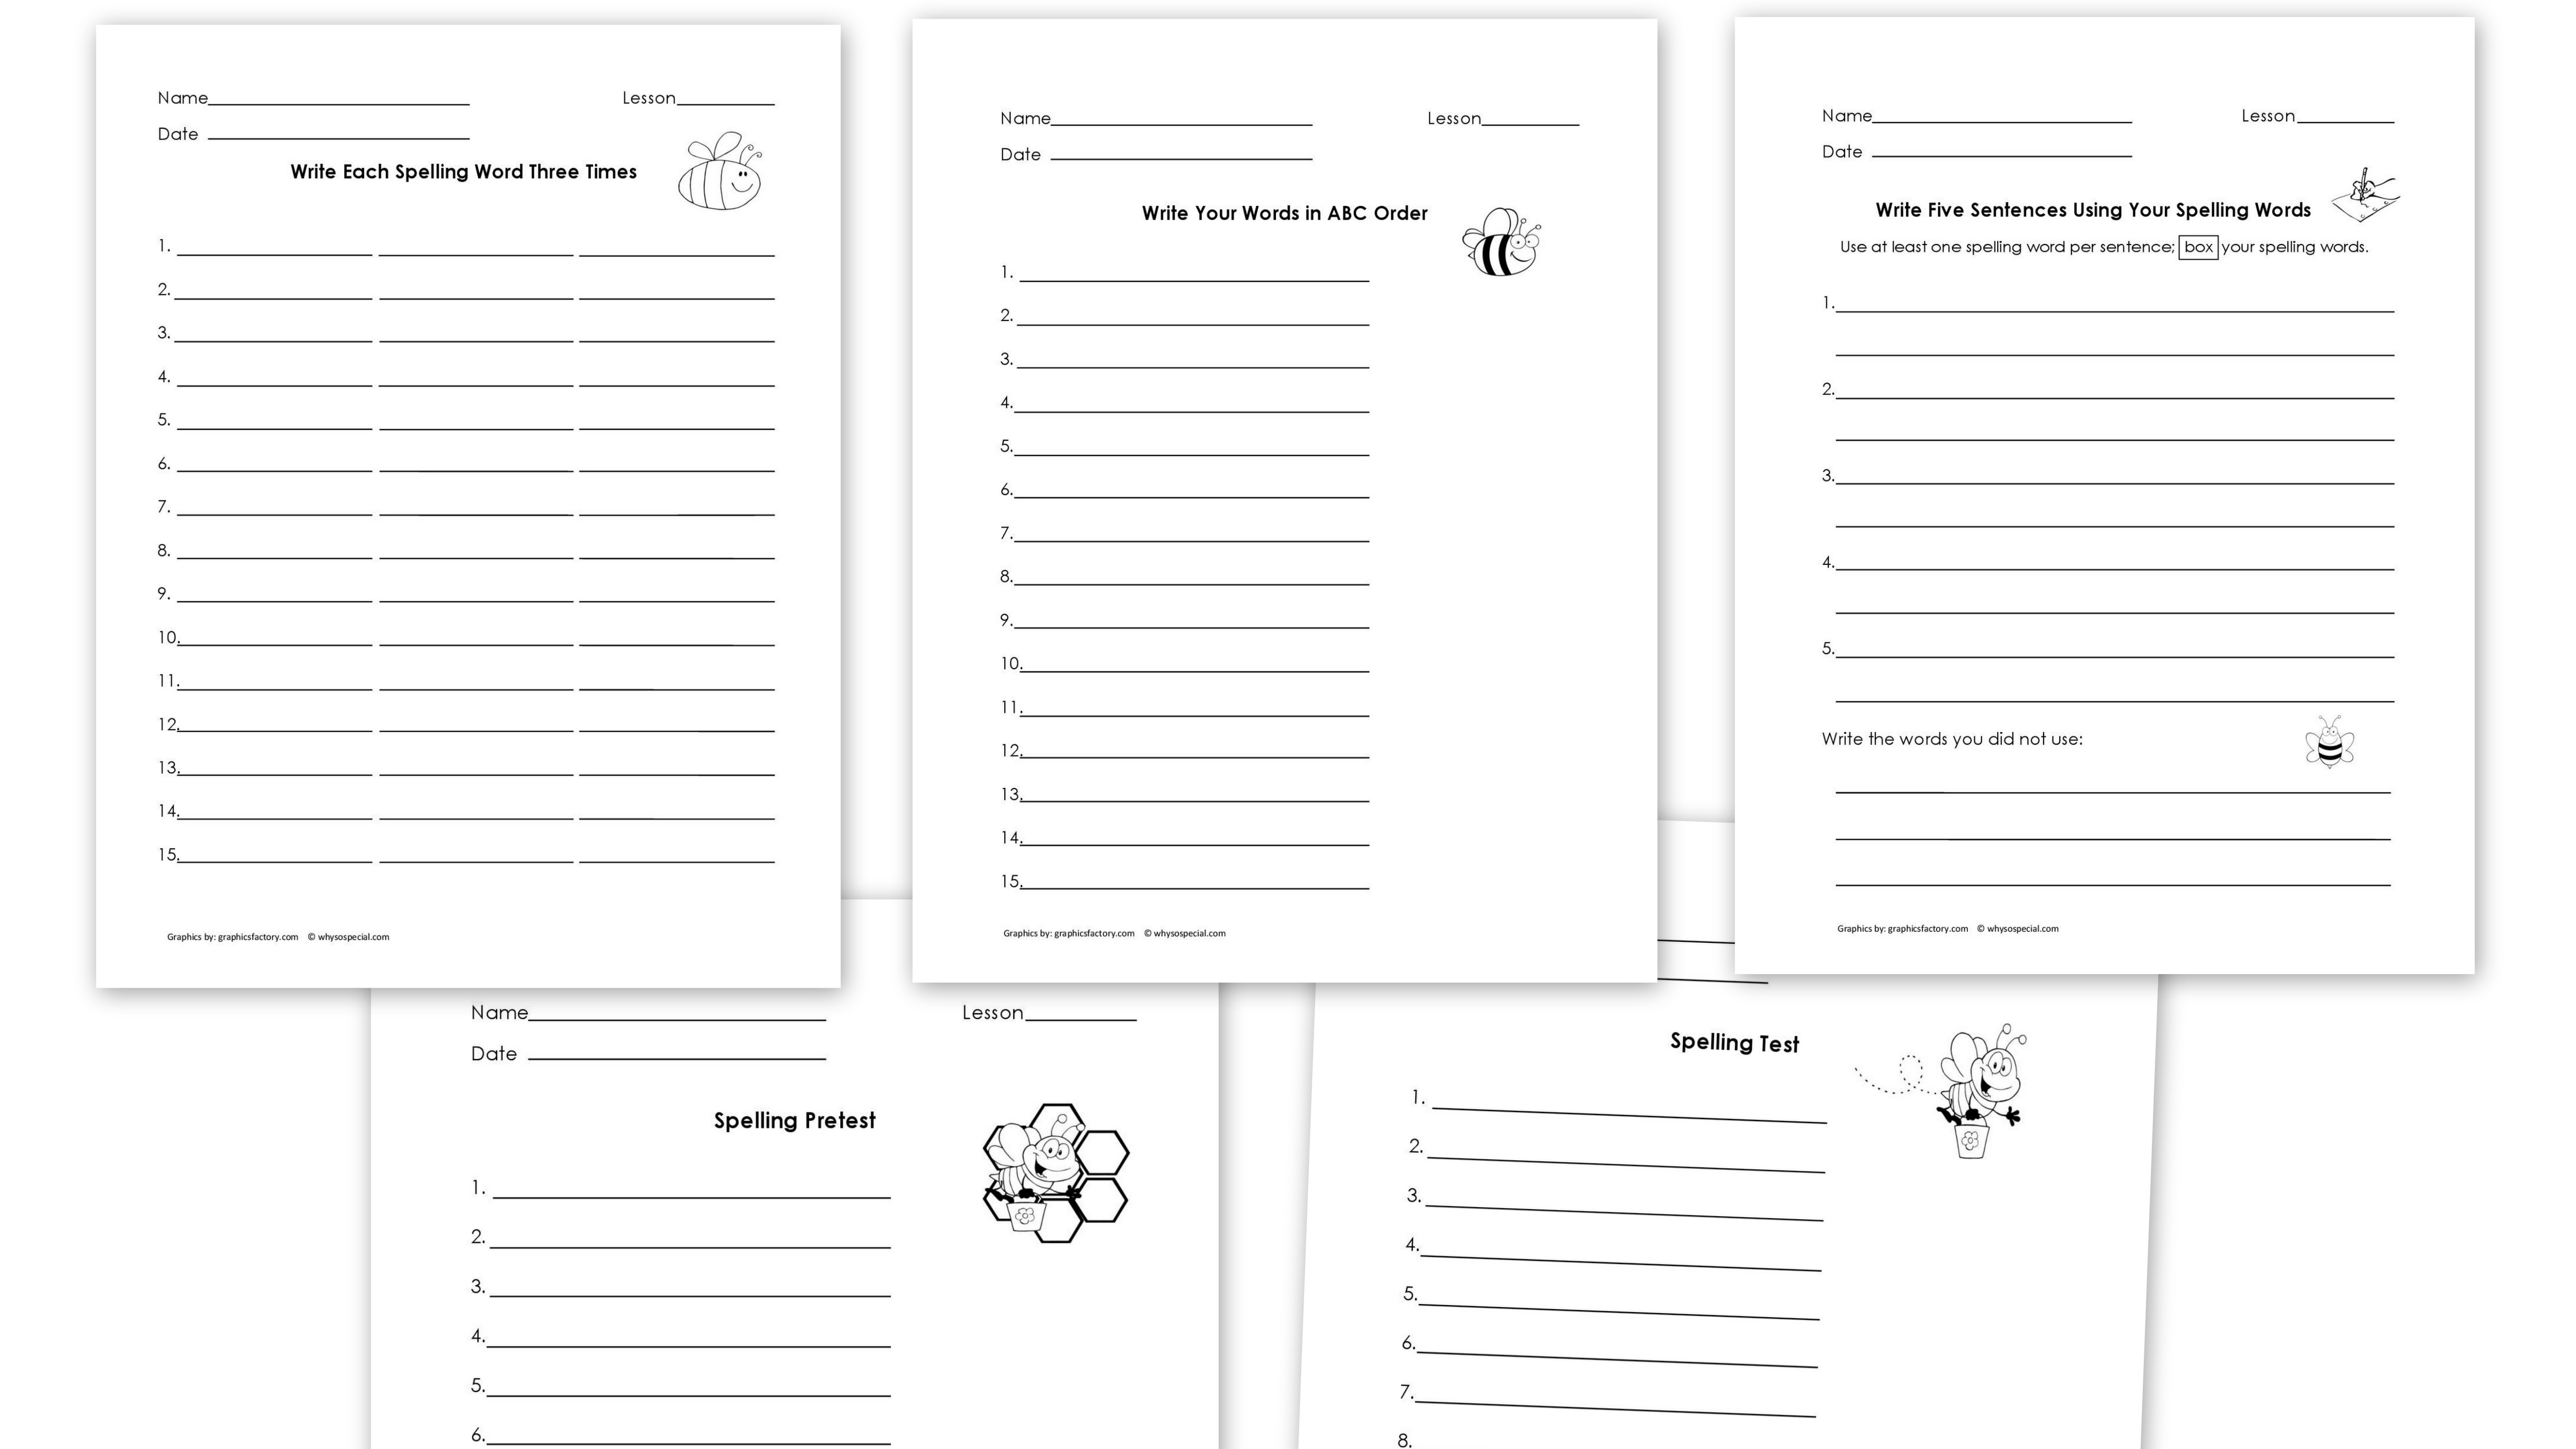 Spelling Practice Sheets - Why So Specialwhy So Special - Free Printable Spelling Practice Worksheets